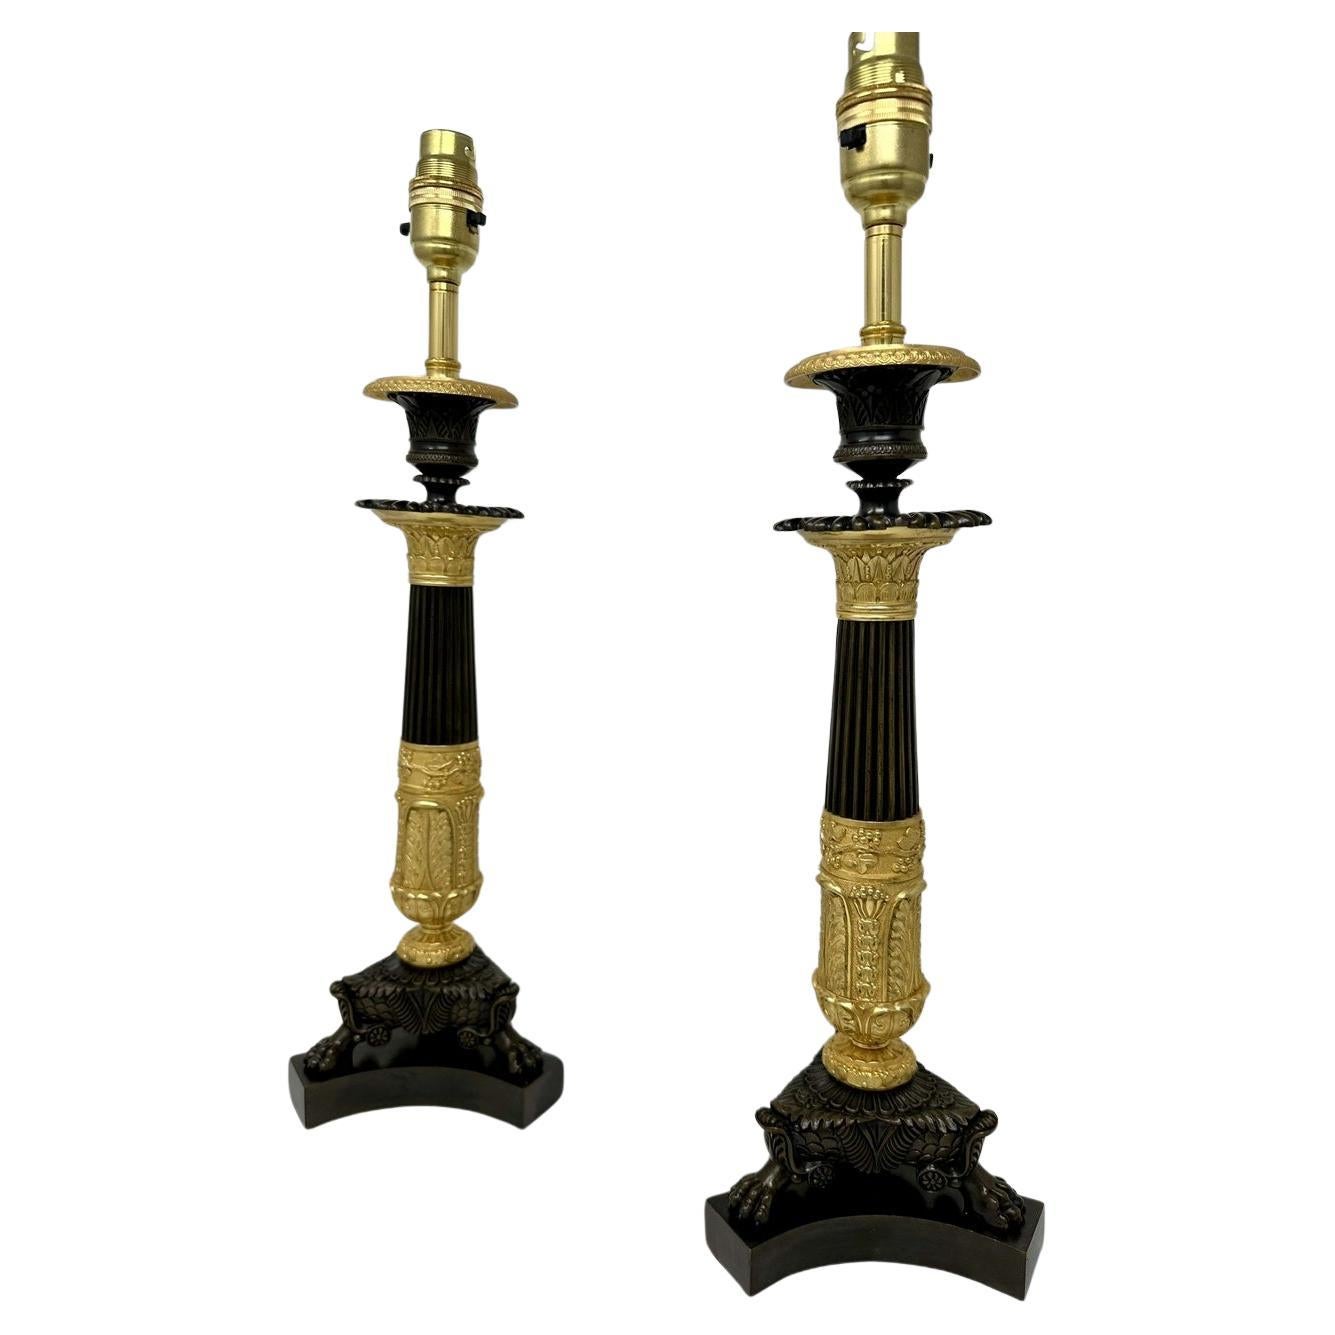 Antique Pair of French Doré Bronze Neoclassical Ormolu Gilt Candlesticks Lamps  For Sale